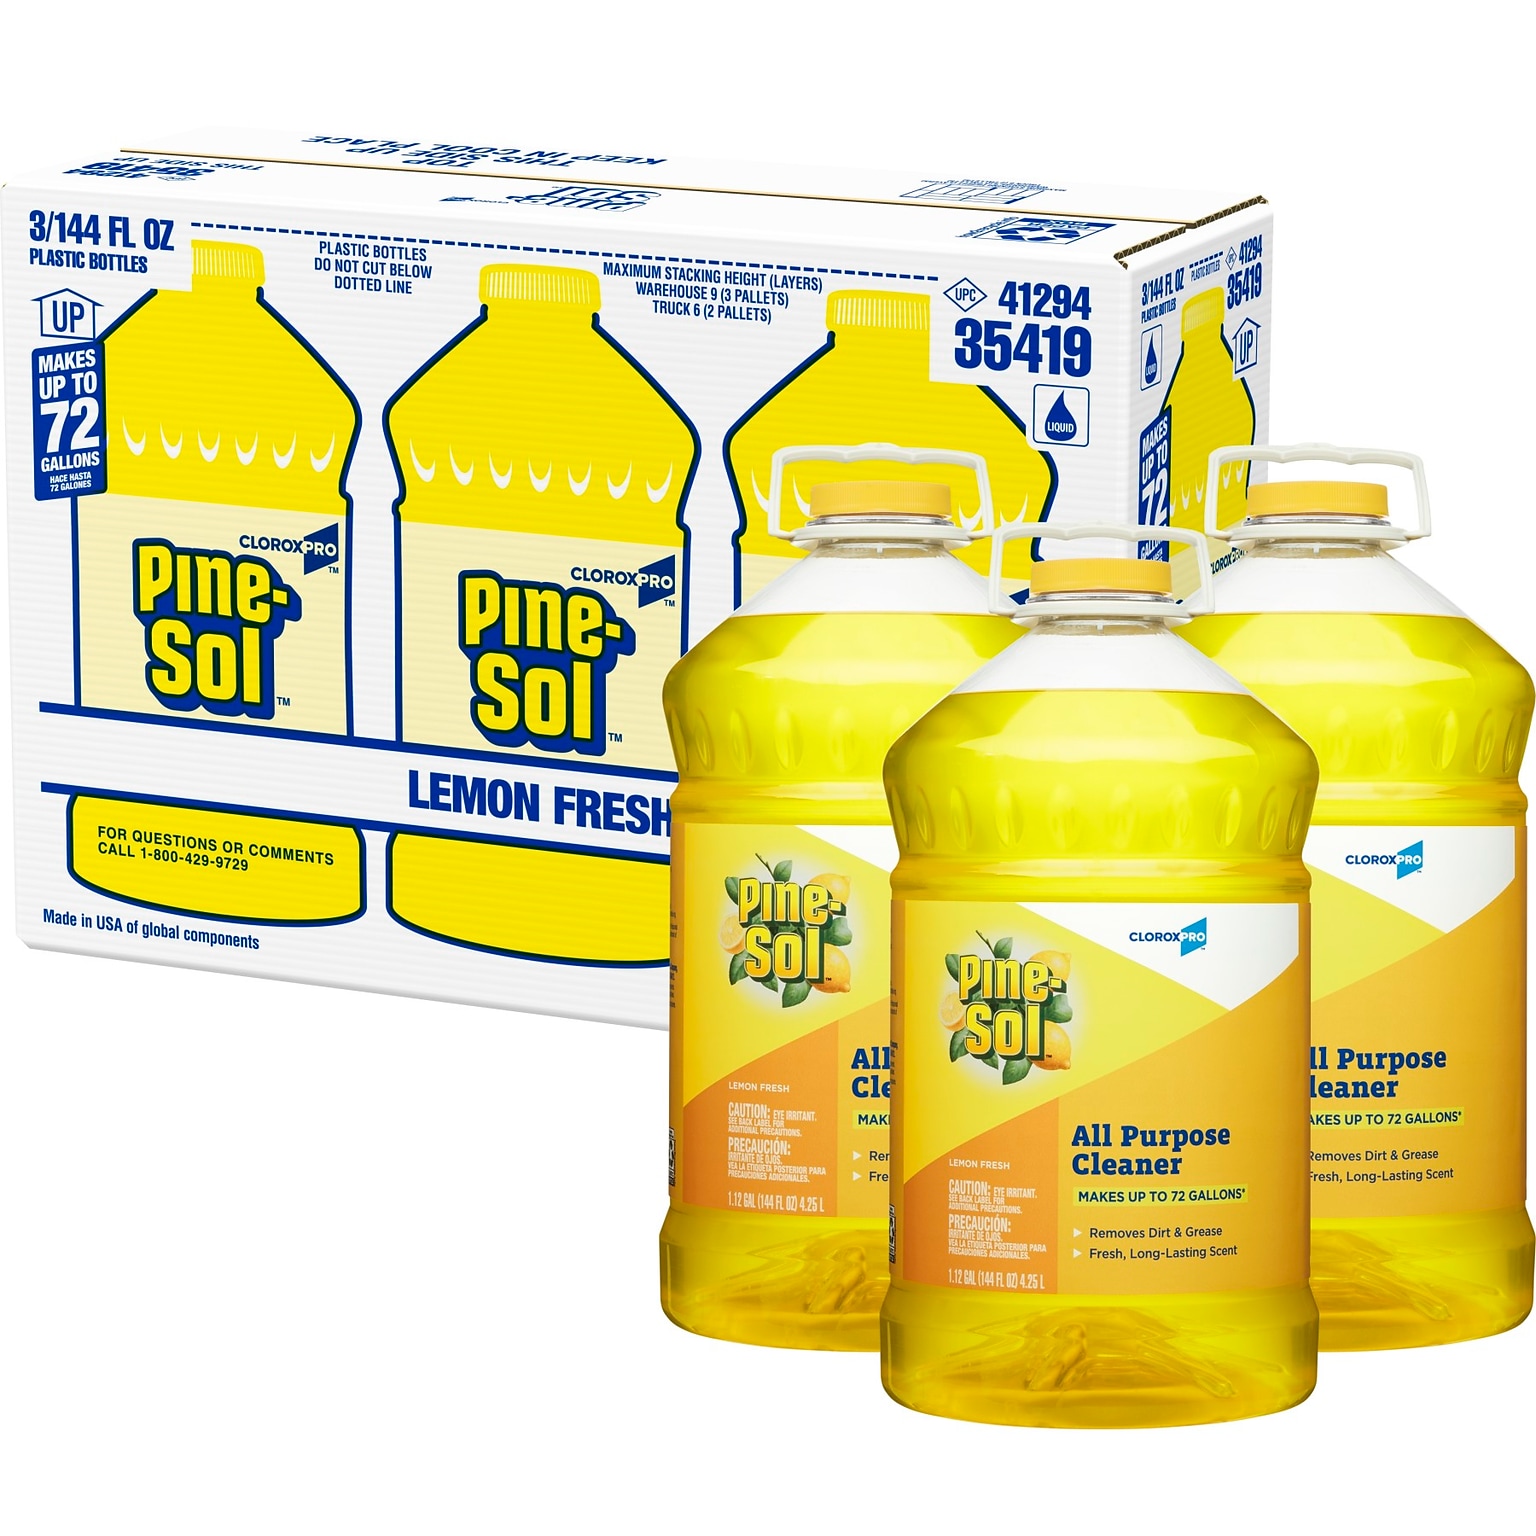 CloroxPro™ Pine-Sol® All Purpose Cleaner, Lemon Fresh,144 Ounces Each (Pack of 3) (35419) (Package may vary)